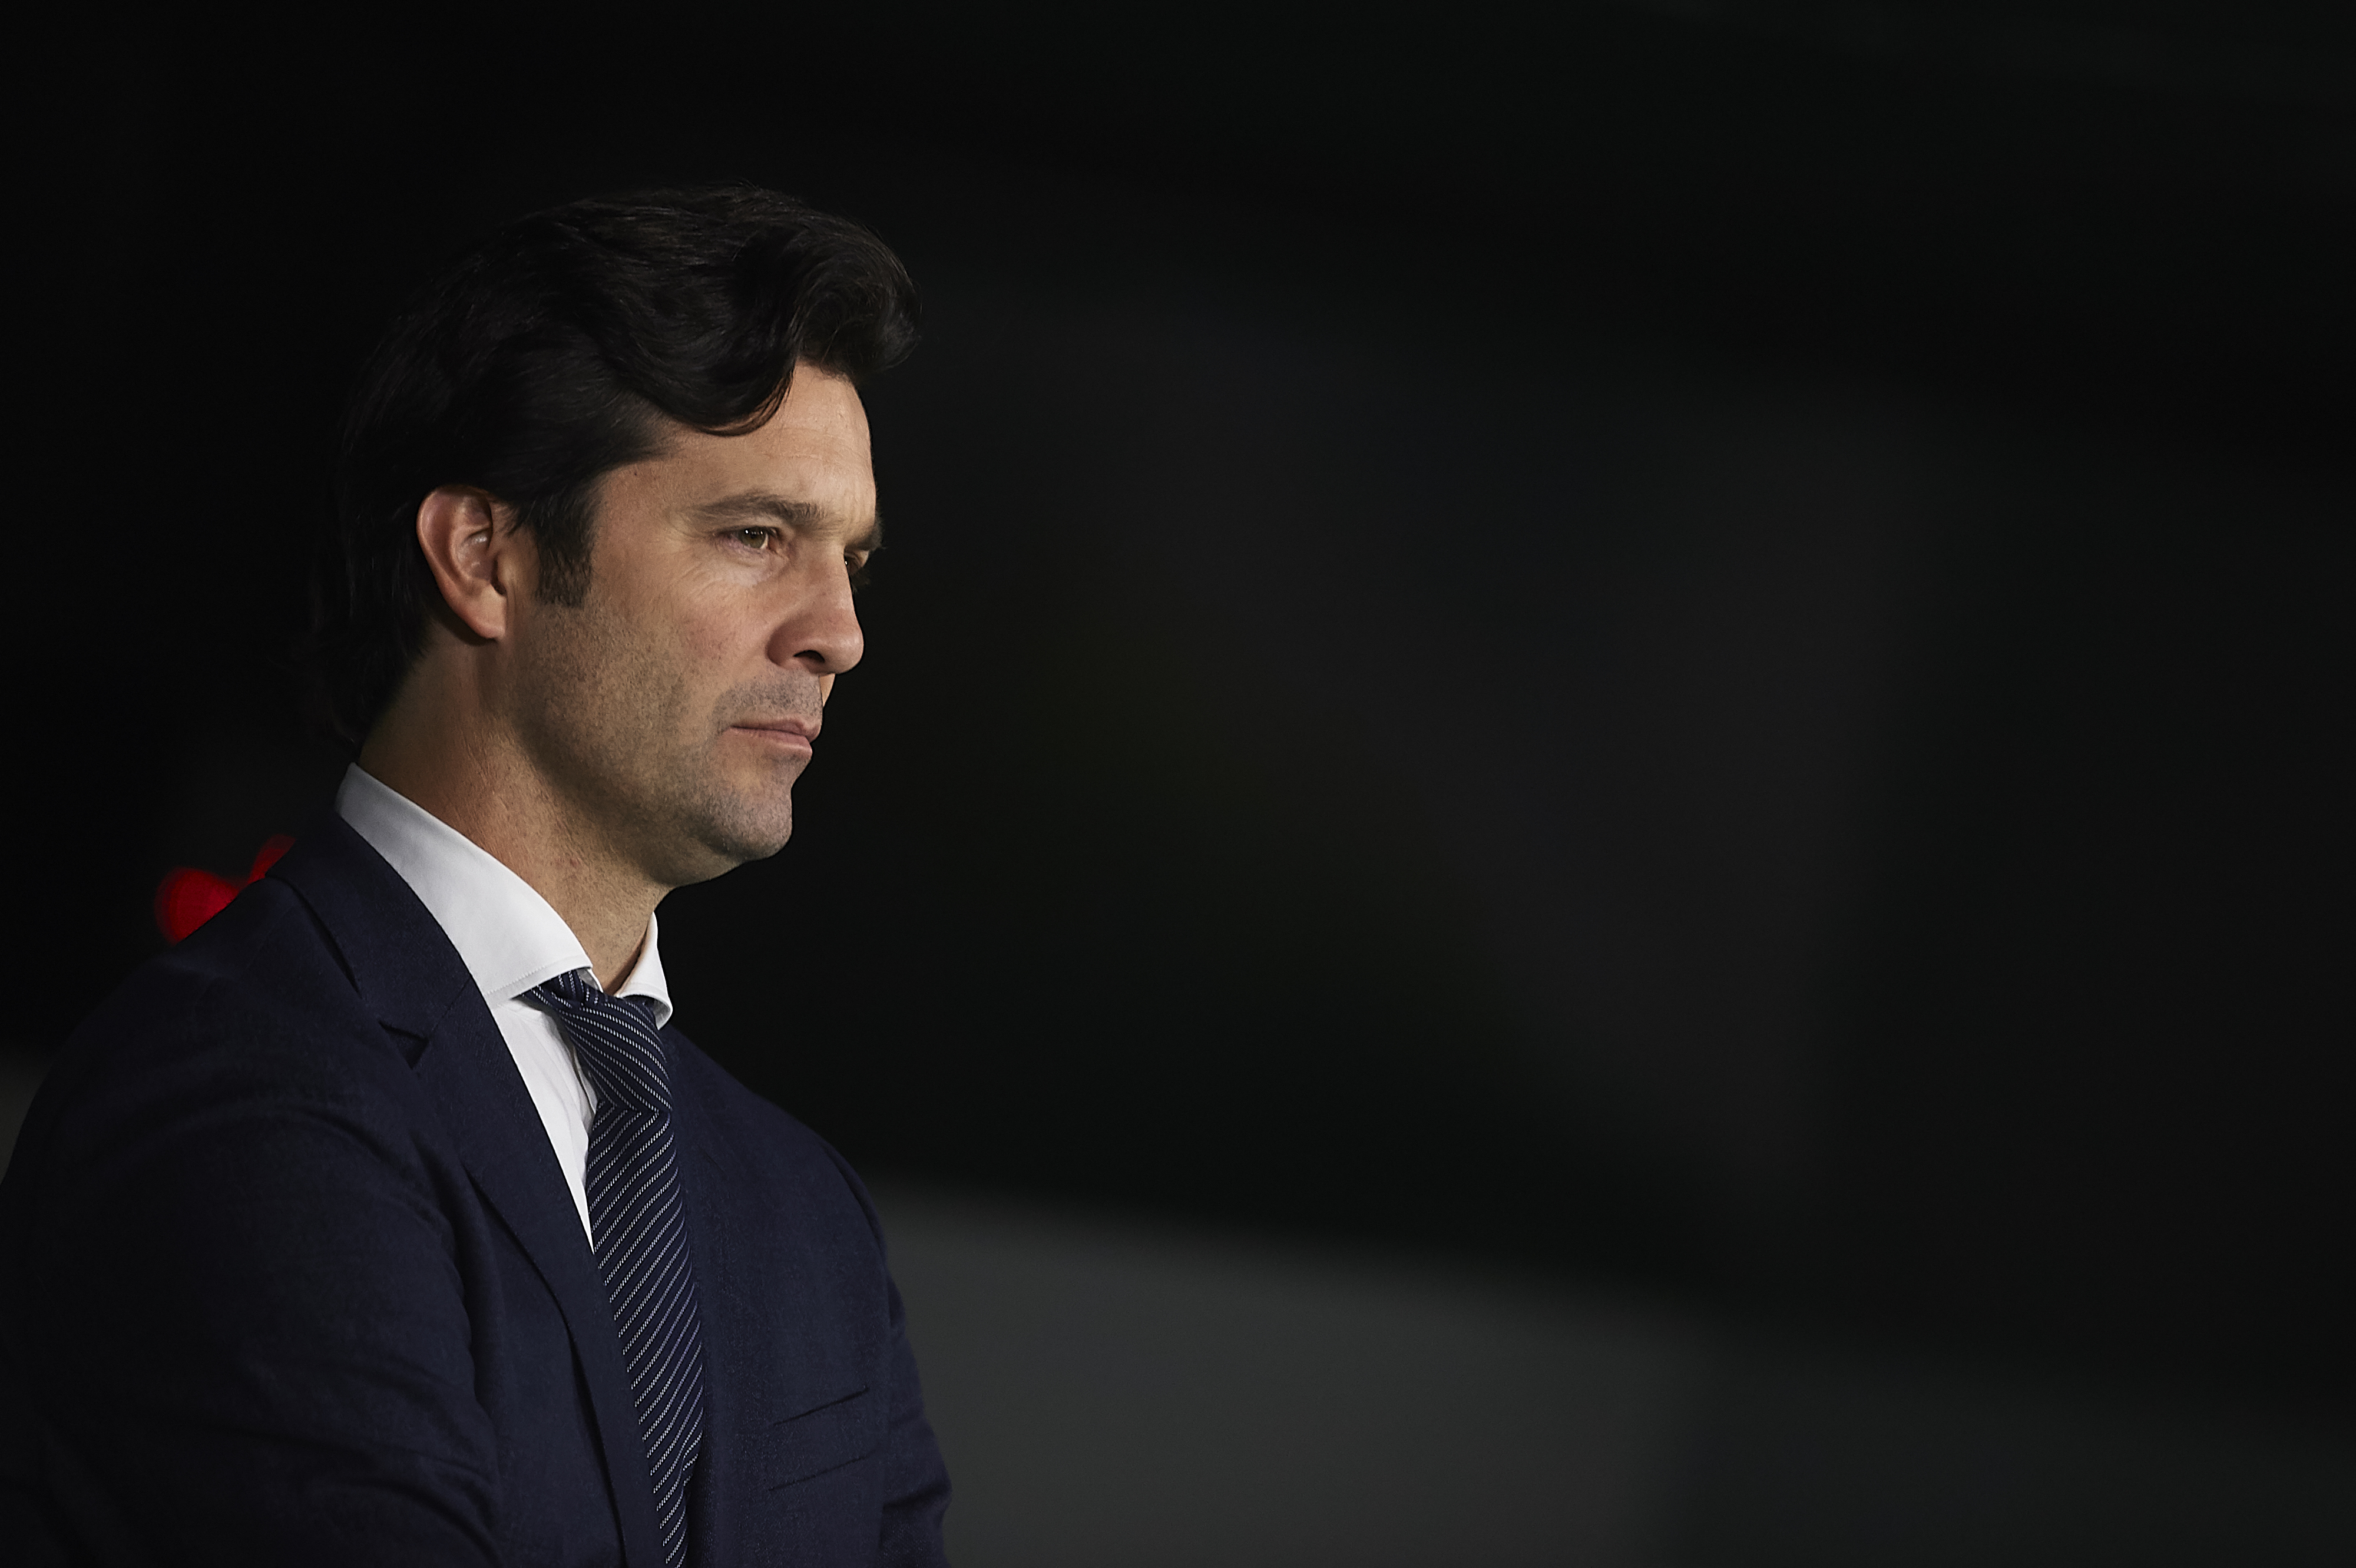 SEVILLE, SPAIN - JANUARY 13: Santiago Solari of Real Madrid CF looks on during the La Liga match between Real Betis Balompie and Real Madrid CF at Estadio Benito Villamarin on January 13, 2019 in Seville, Spain. (Photo by Aitor Alcalde/Getty Images)